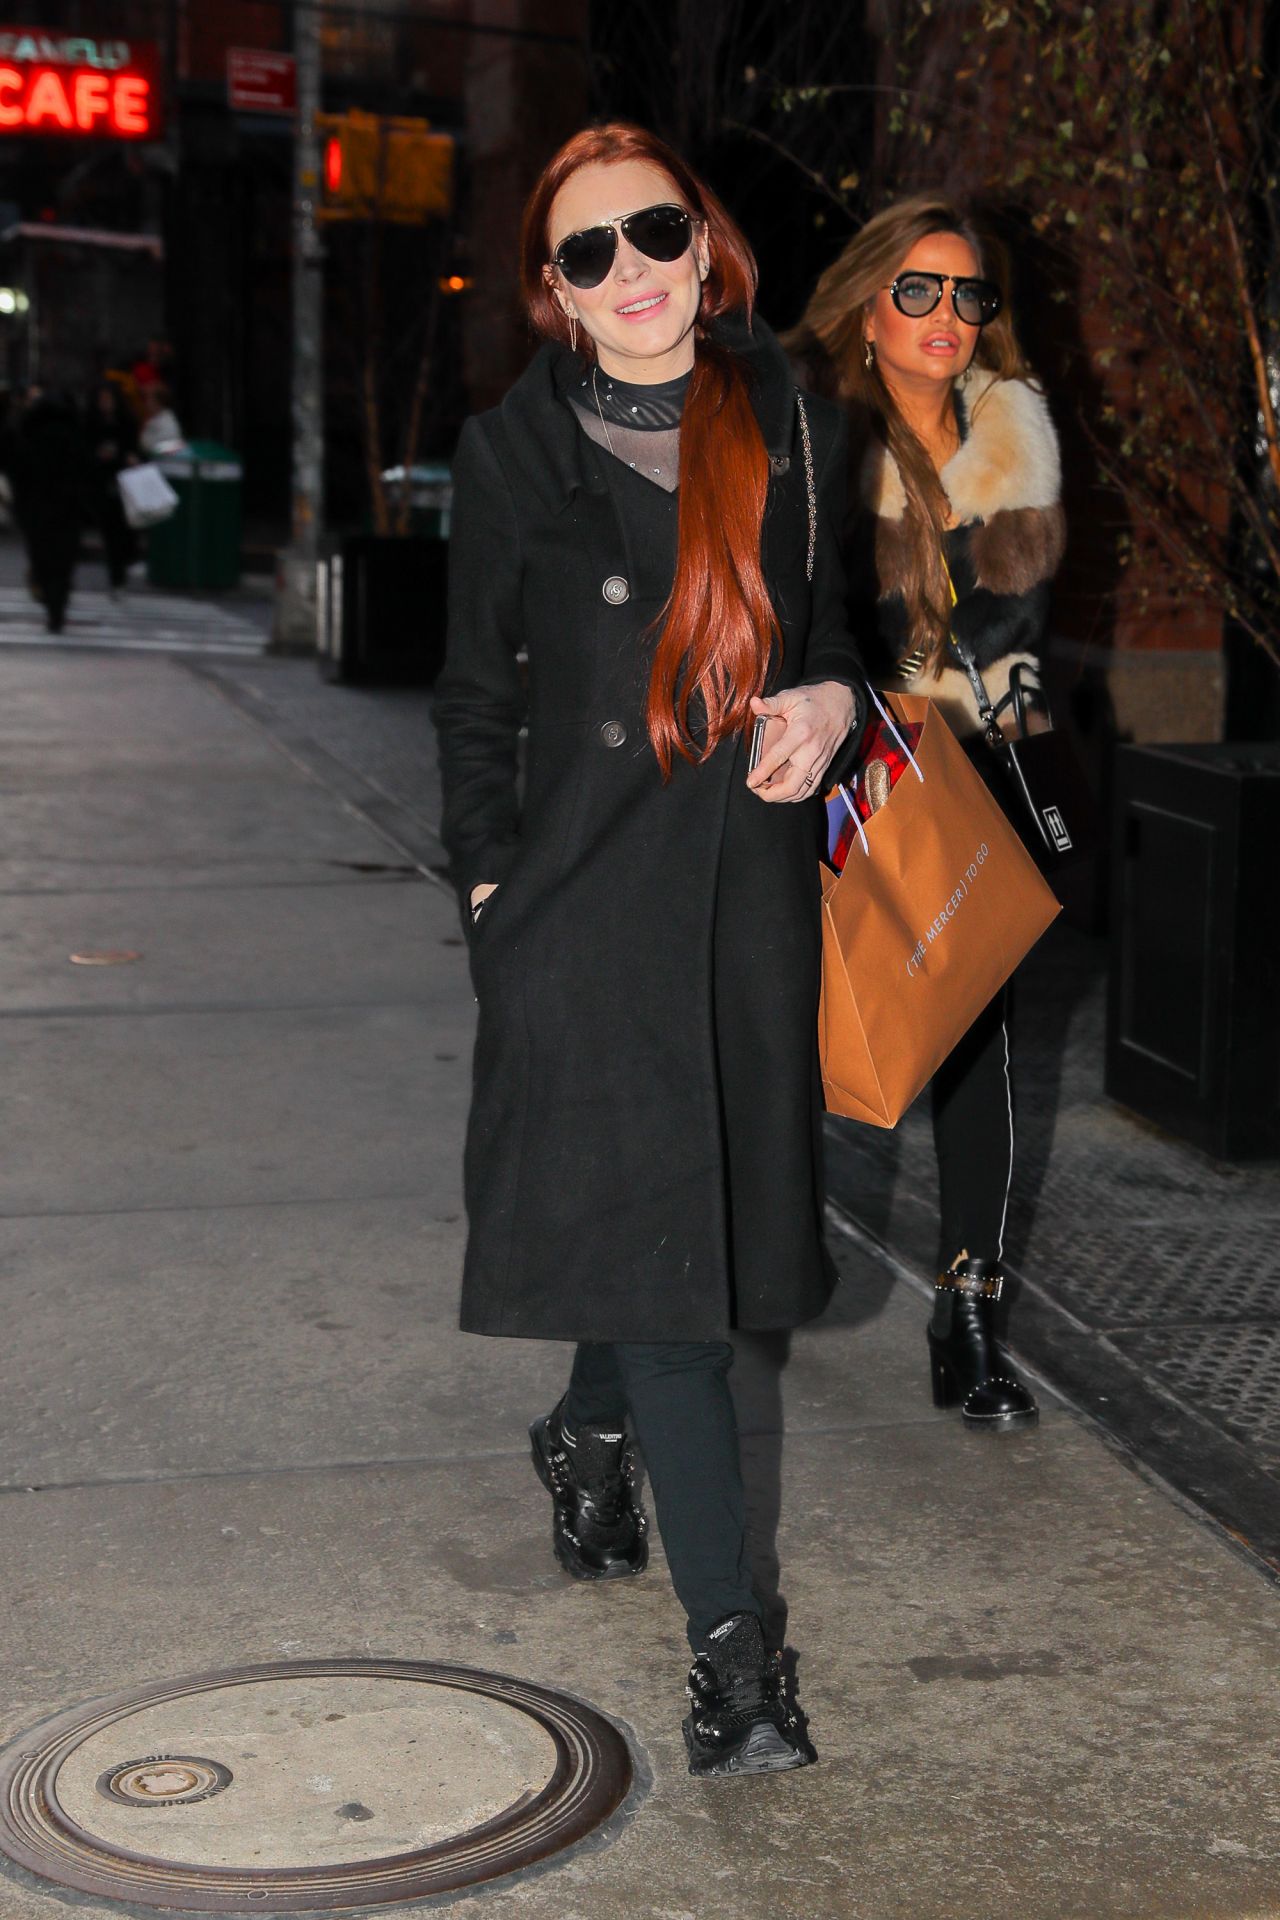 lindsay-lohan-night-out-in-new-york-01-02-2019-4.jpg